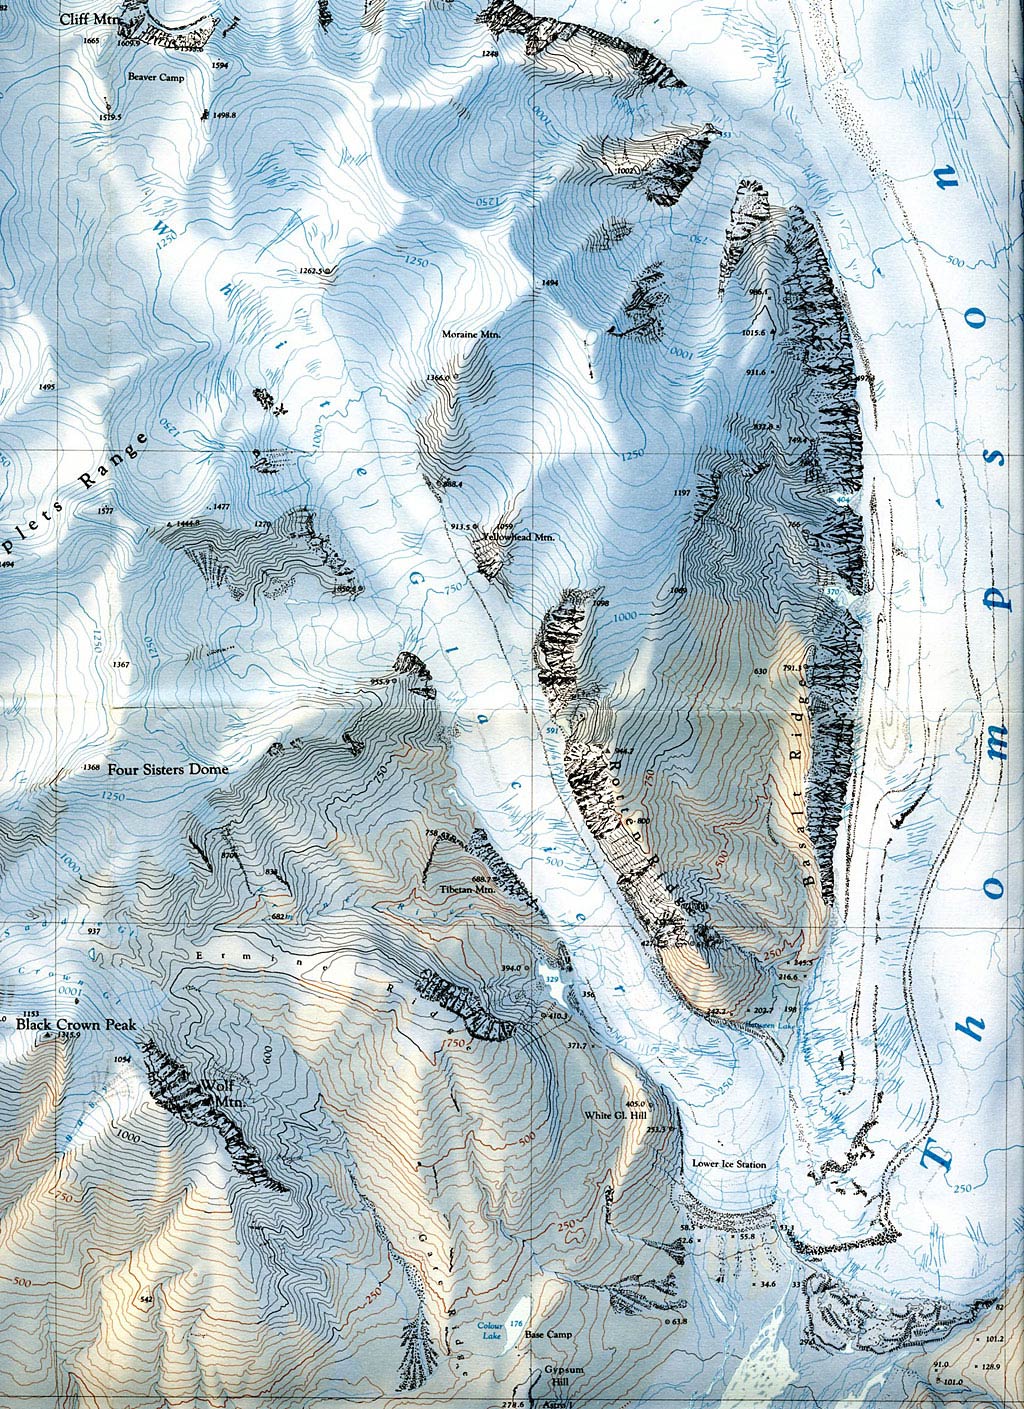 Topographic maps of the expedition area